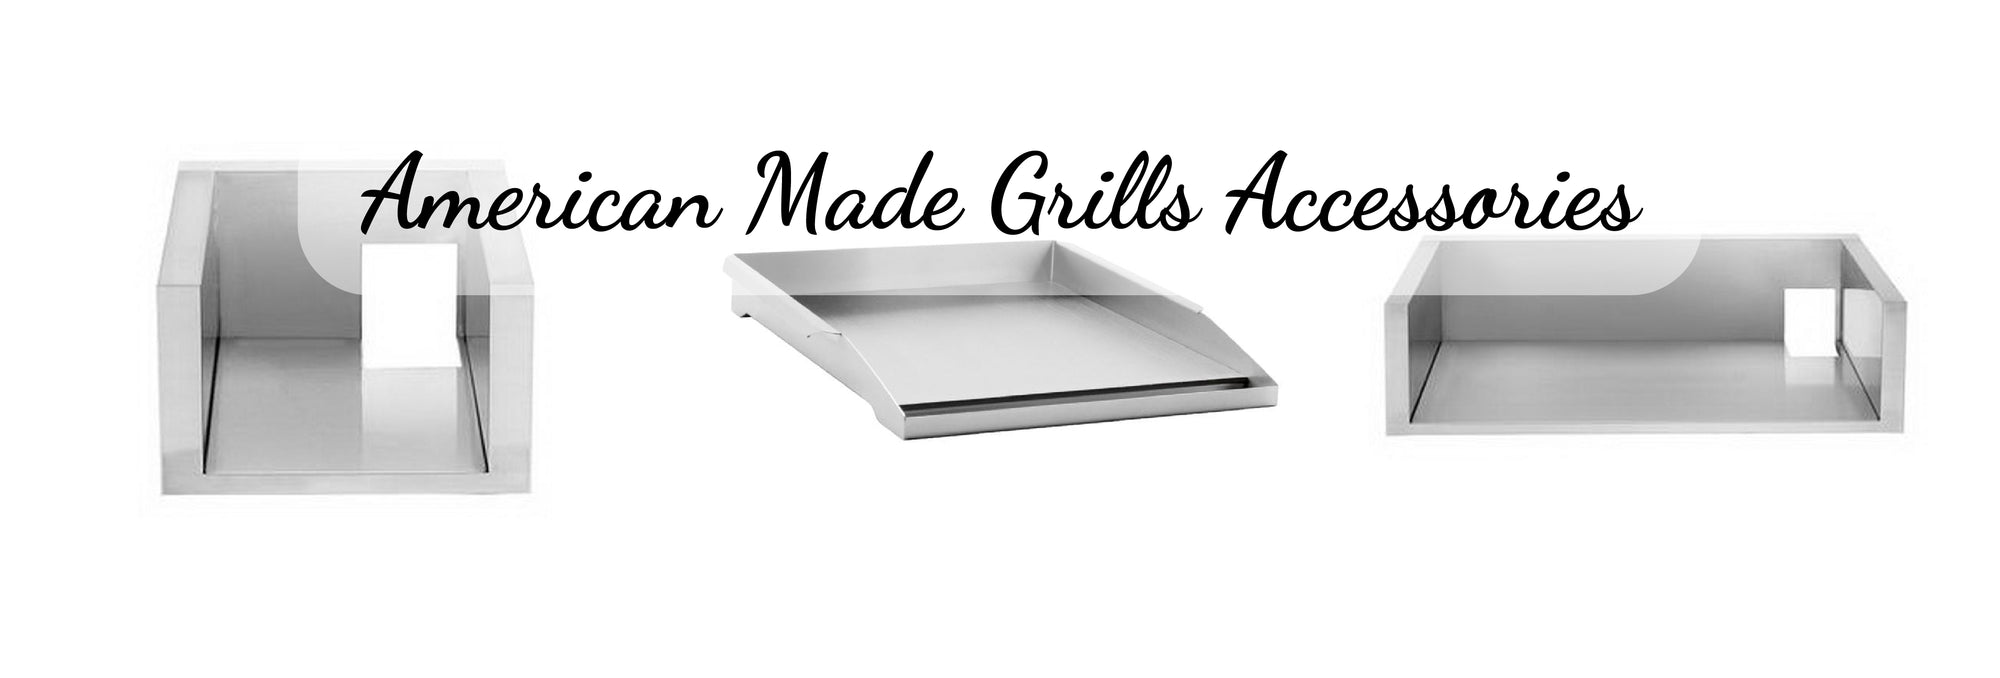 American Made Grills Accessories